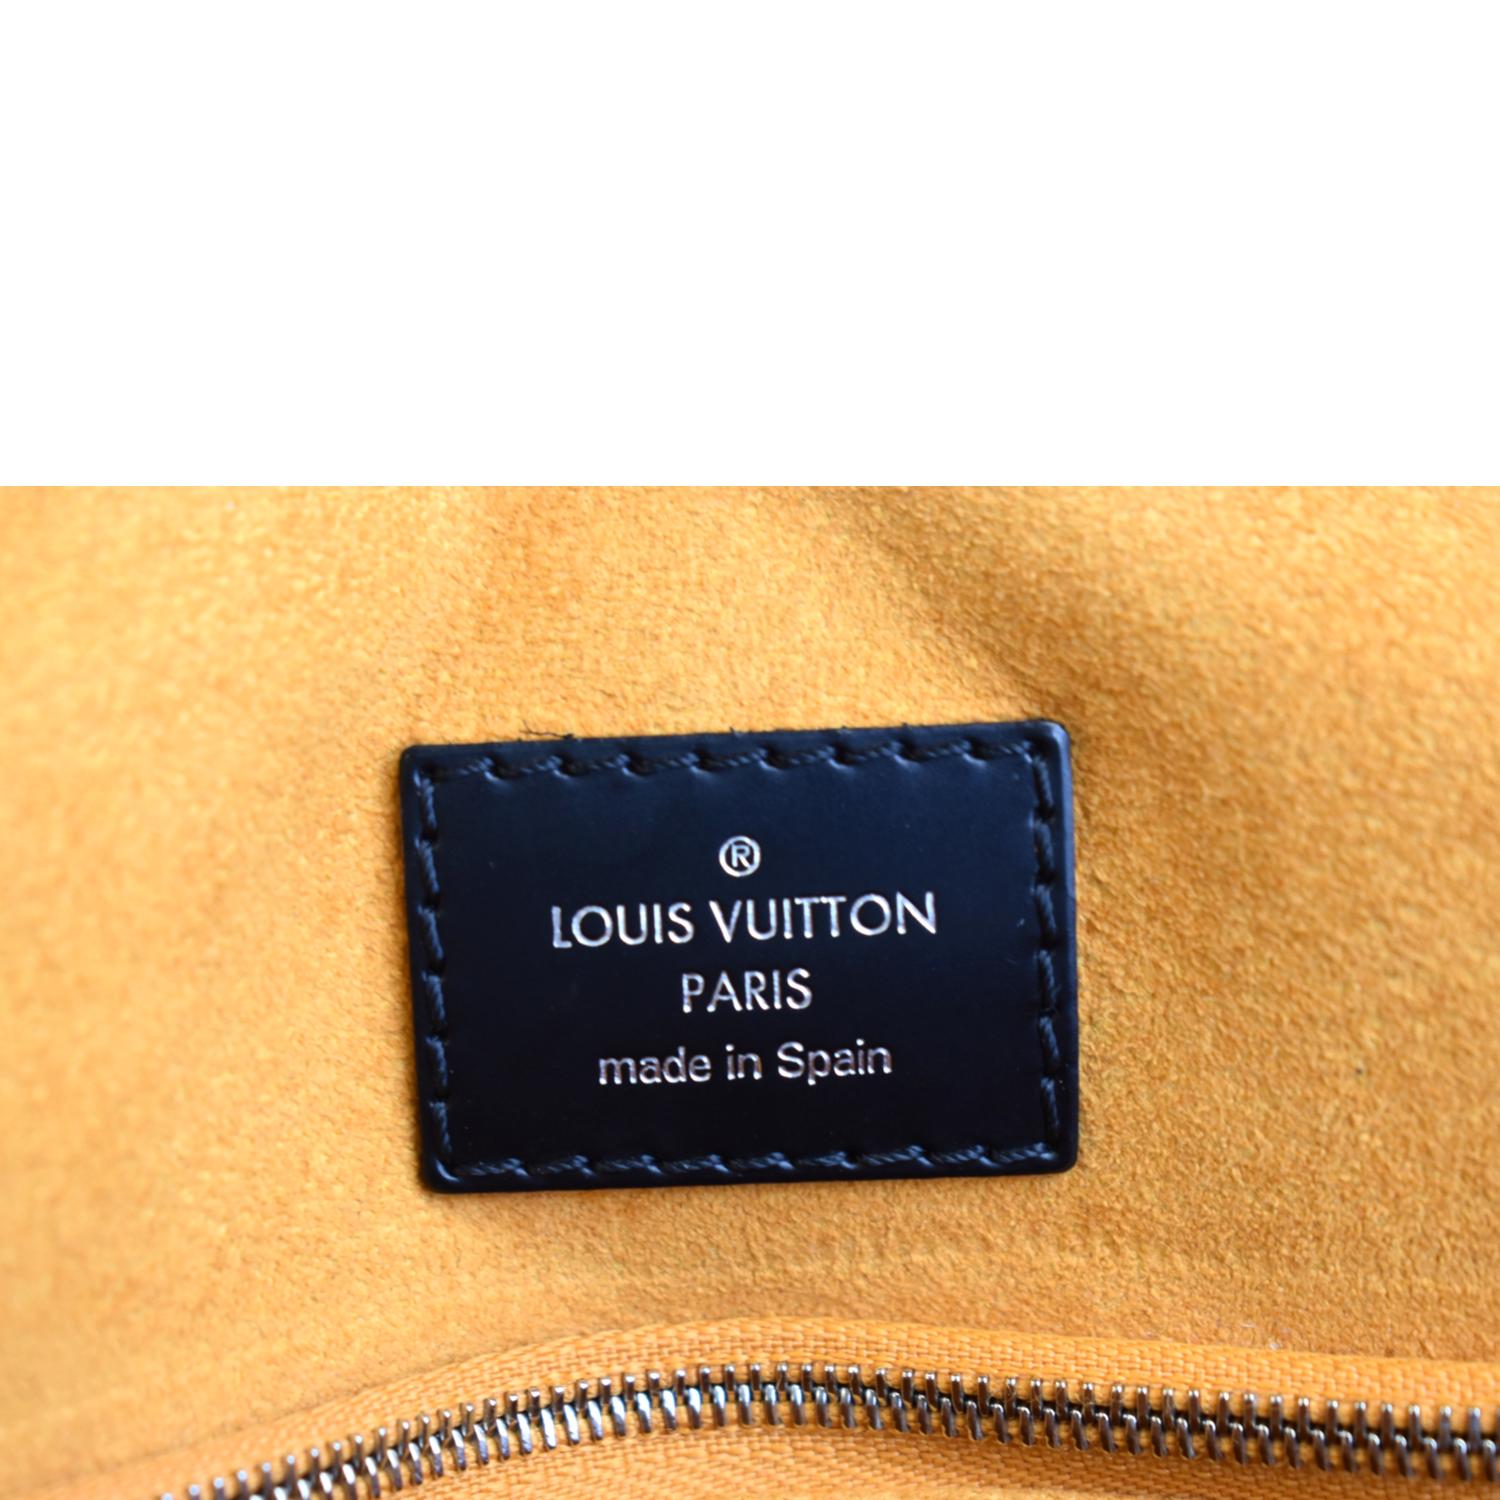 Grenelle Pm Louis Vuitton - For Sale on 1stDibs